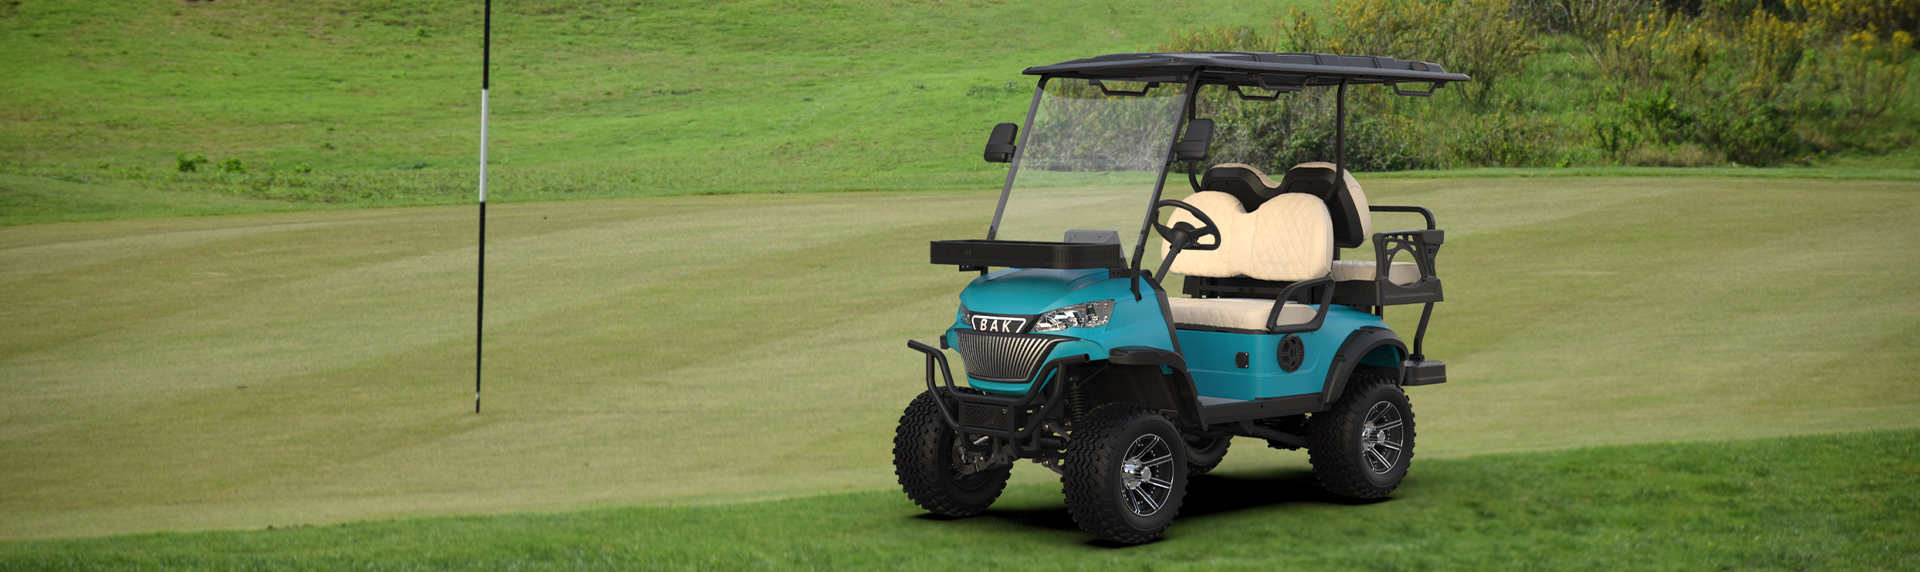 Low Chassis K-C4 Golf Cart With DOT Certified Highway tire